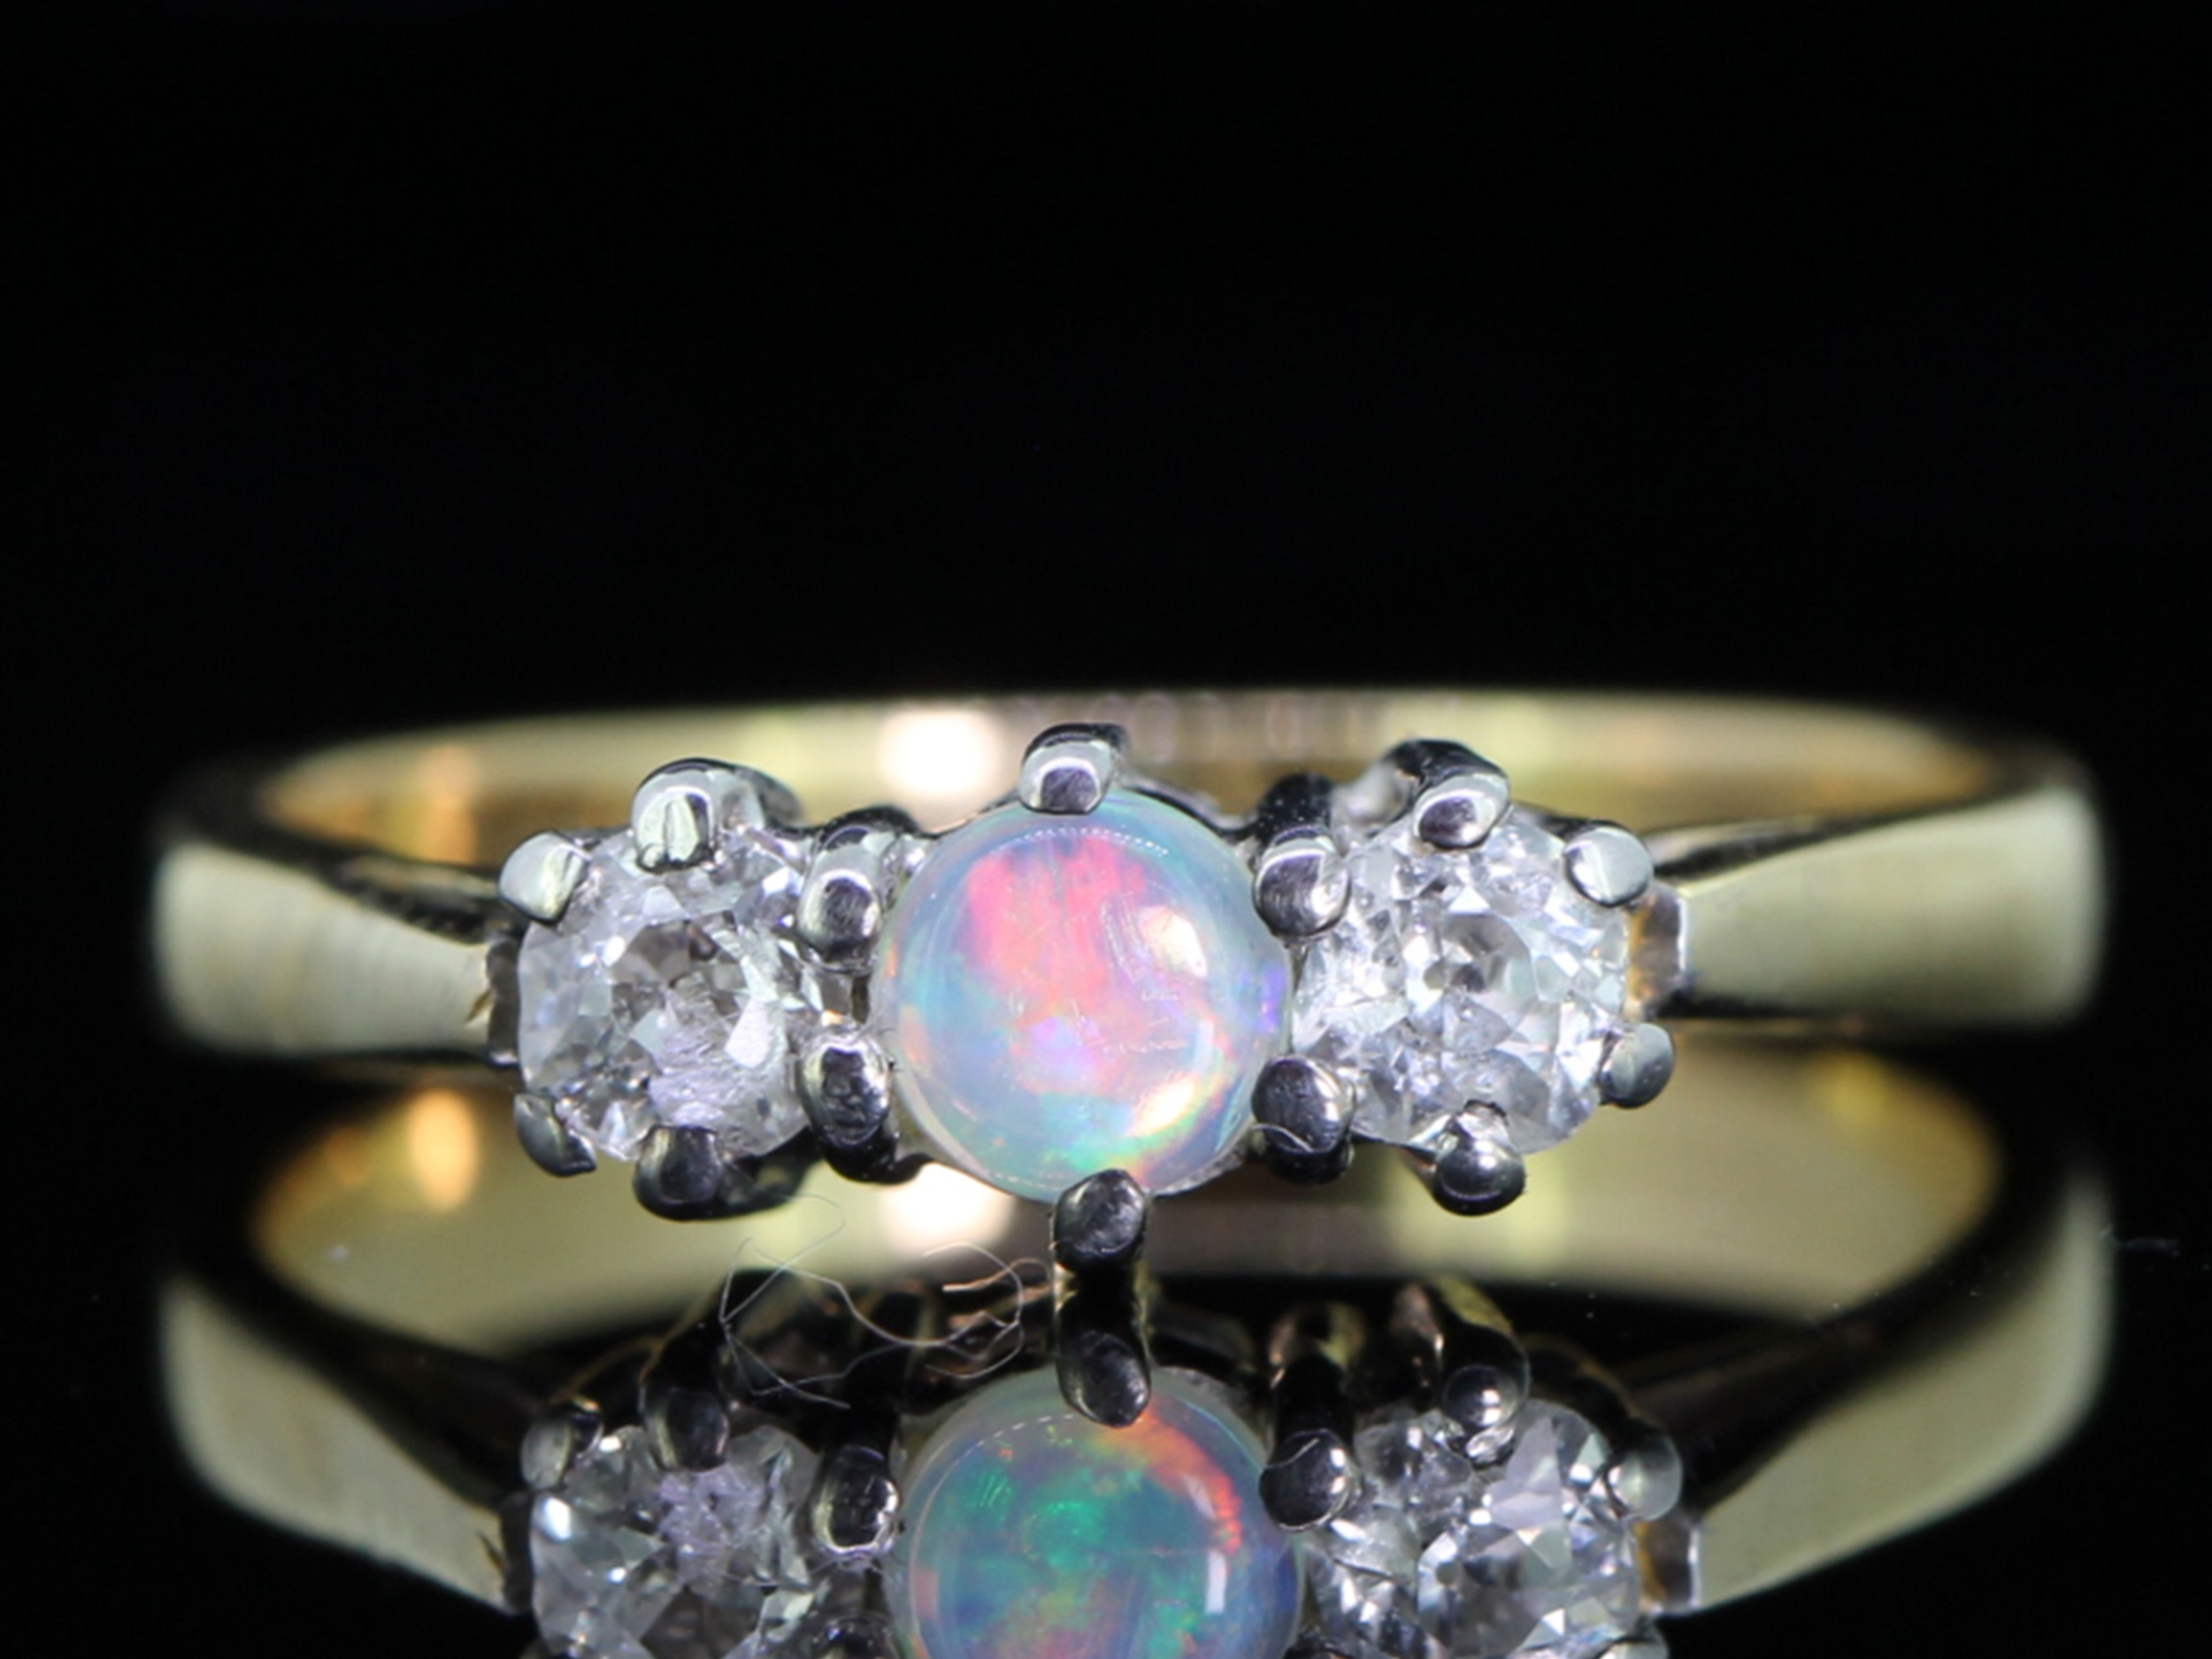 Sweet vintage opal and diamond 18 carat gold trilogy ring